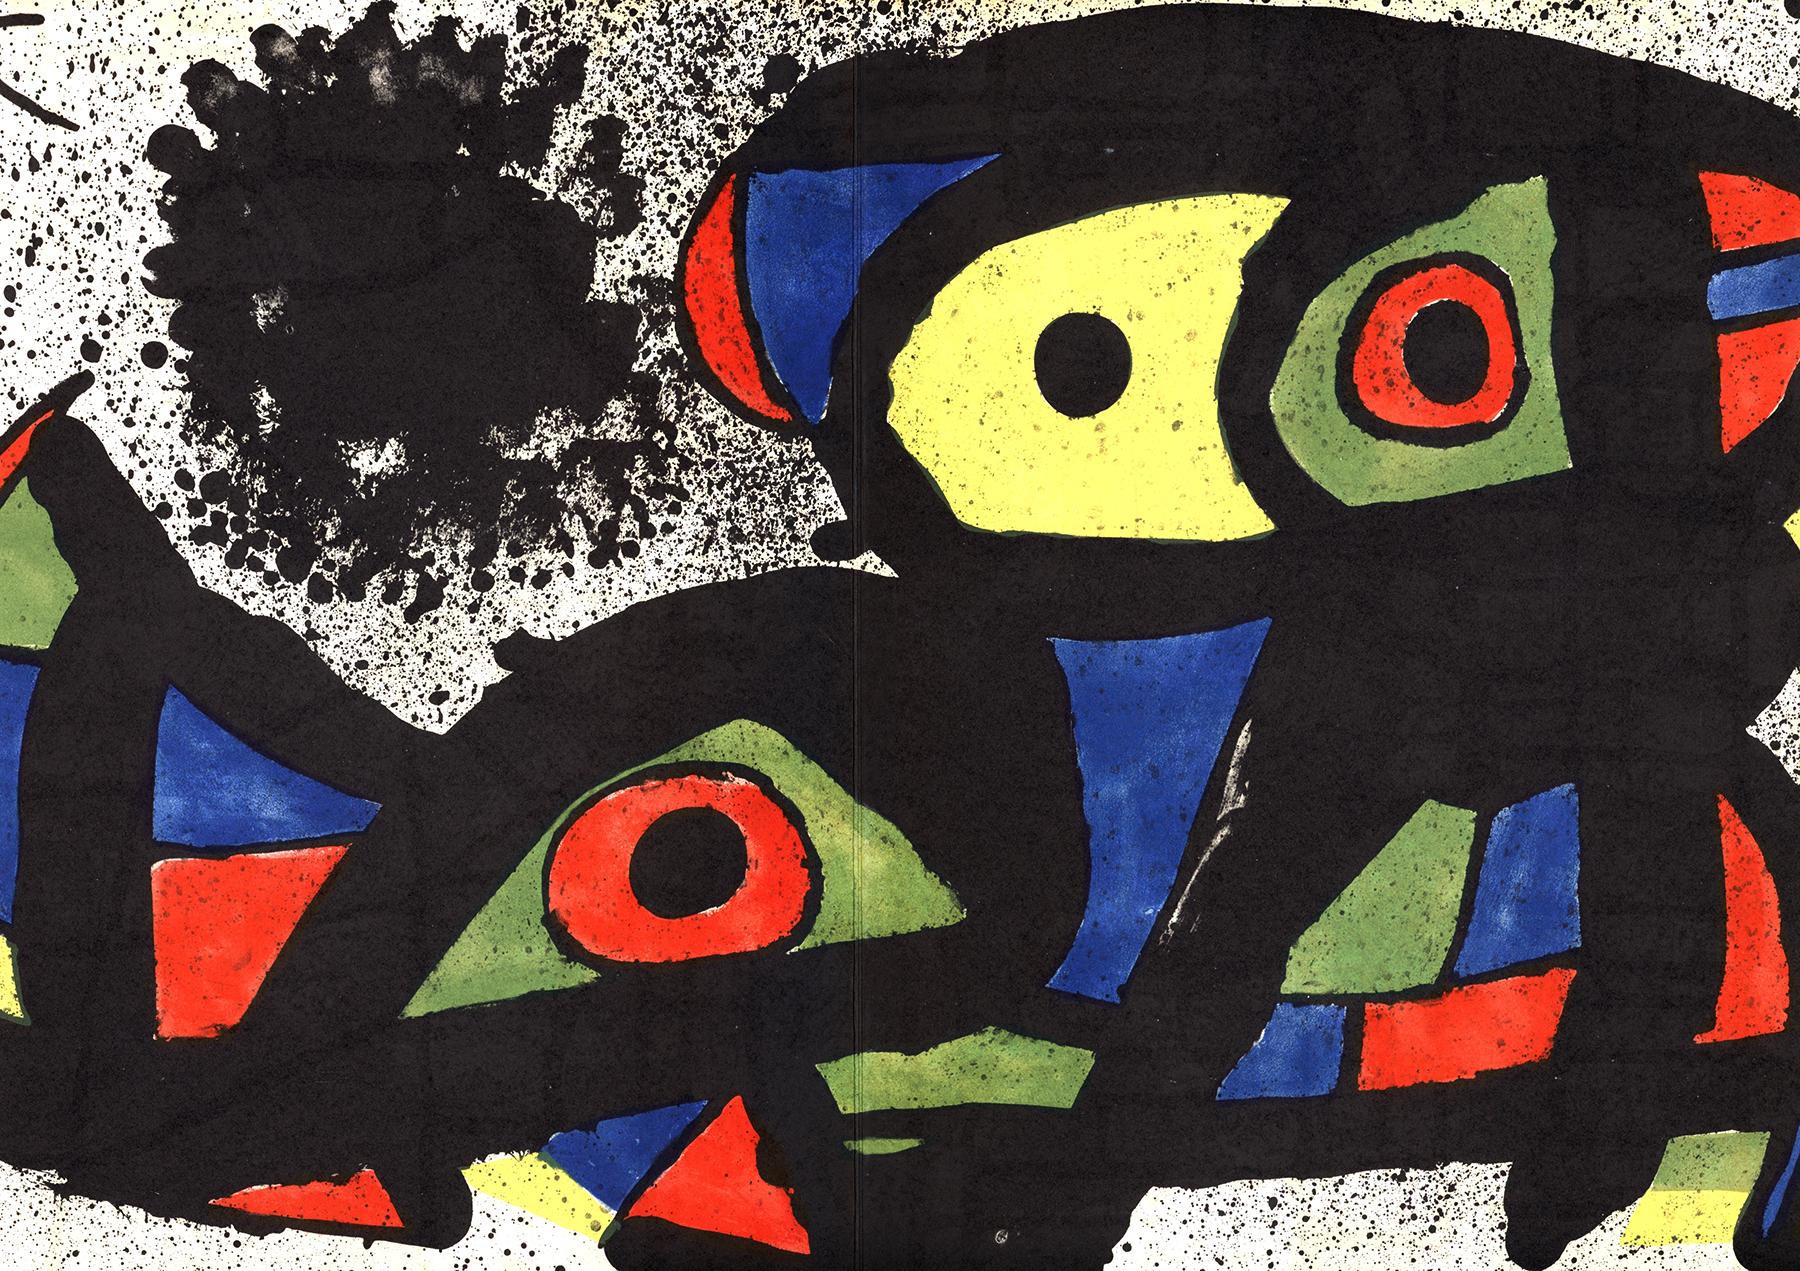 What symbols did Miró use in his paintings?